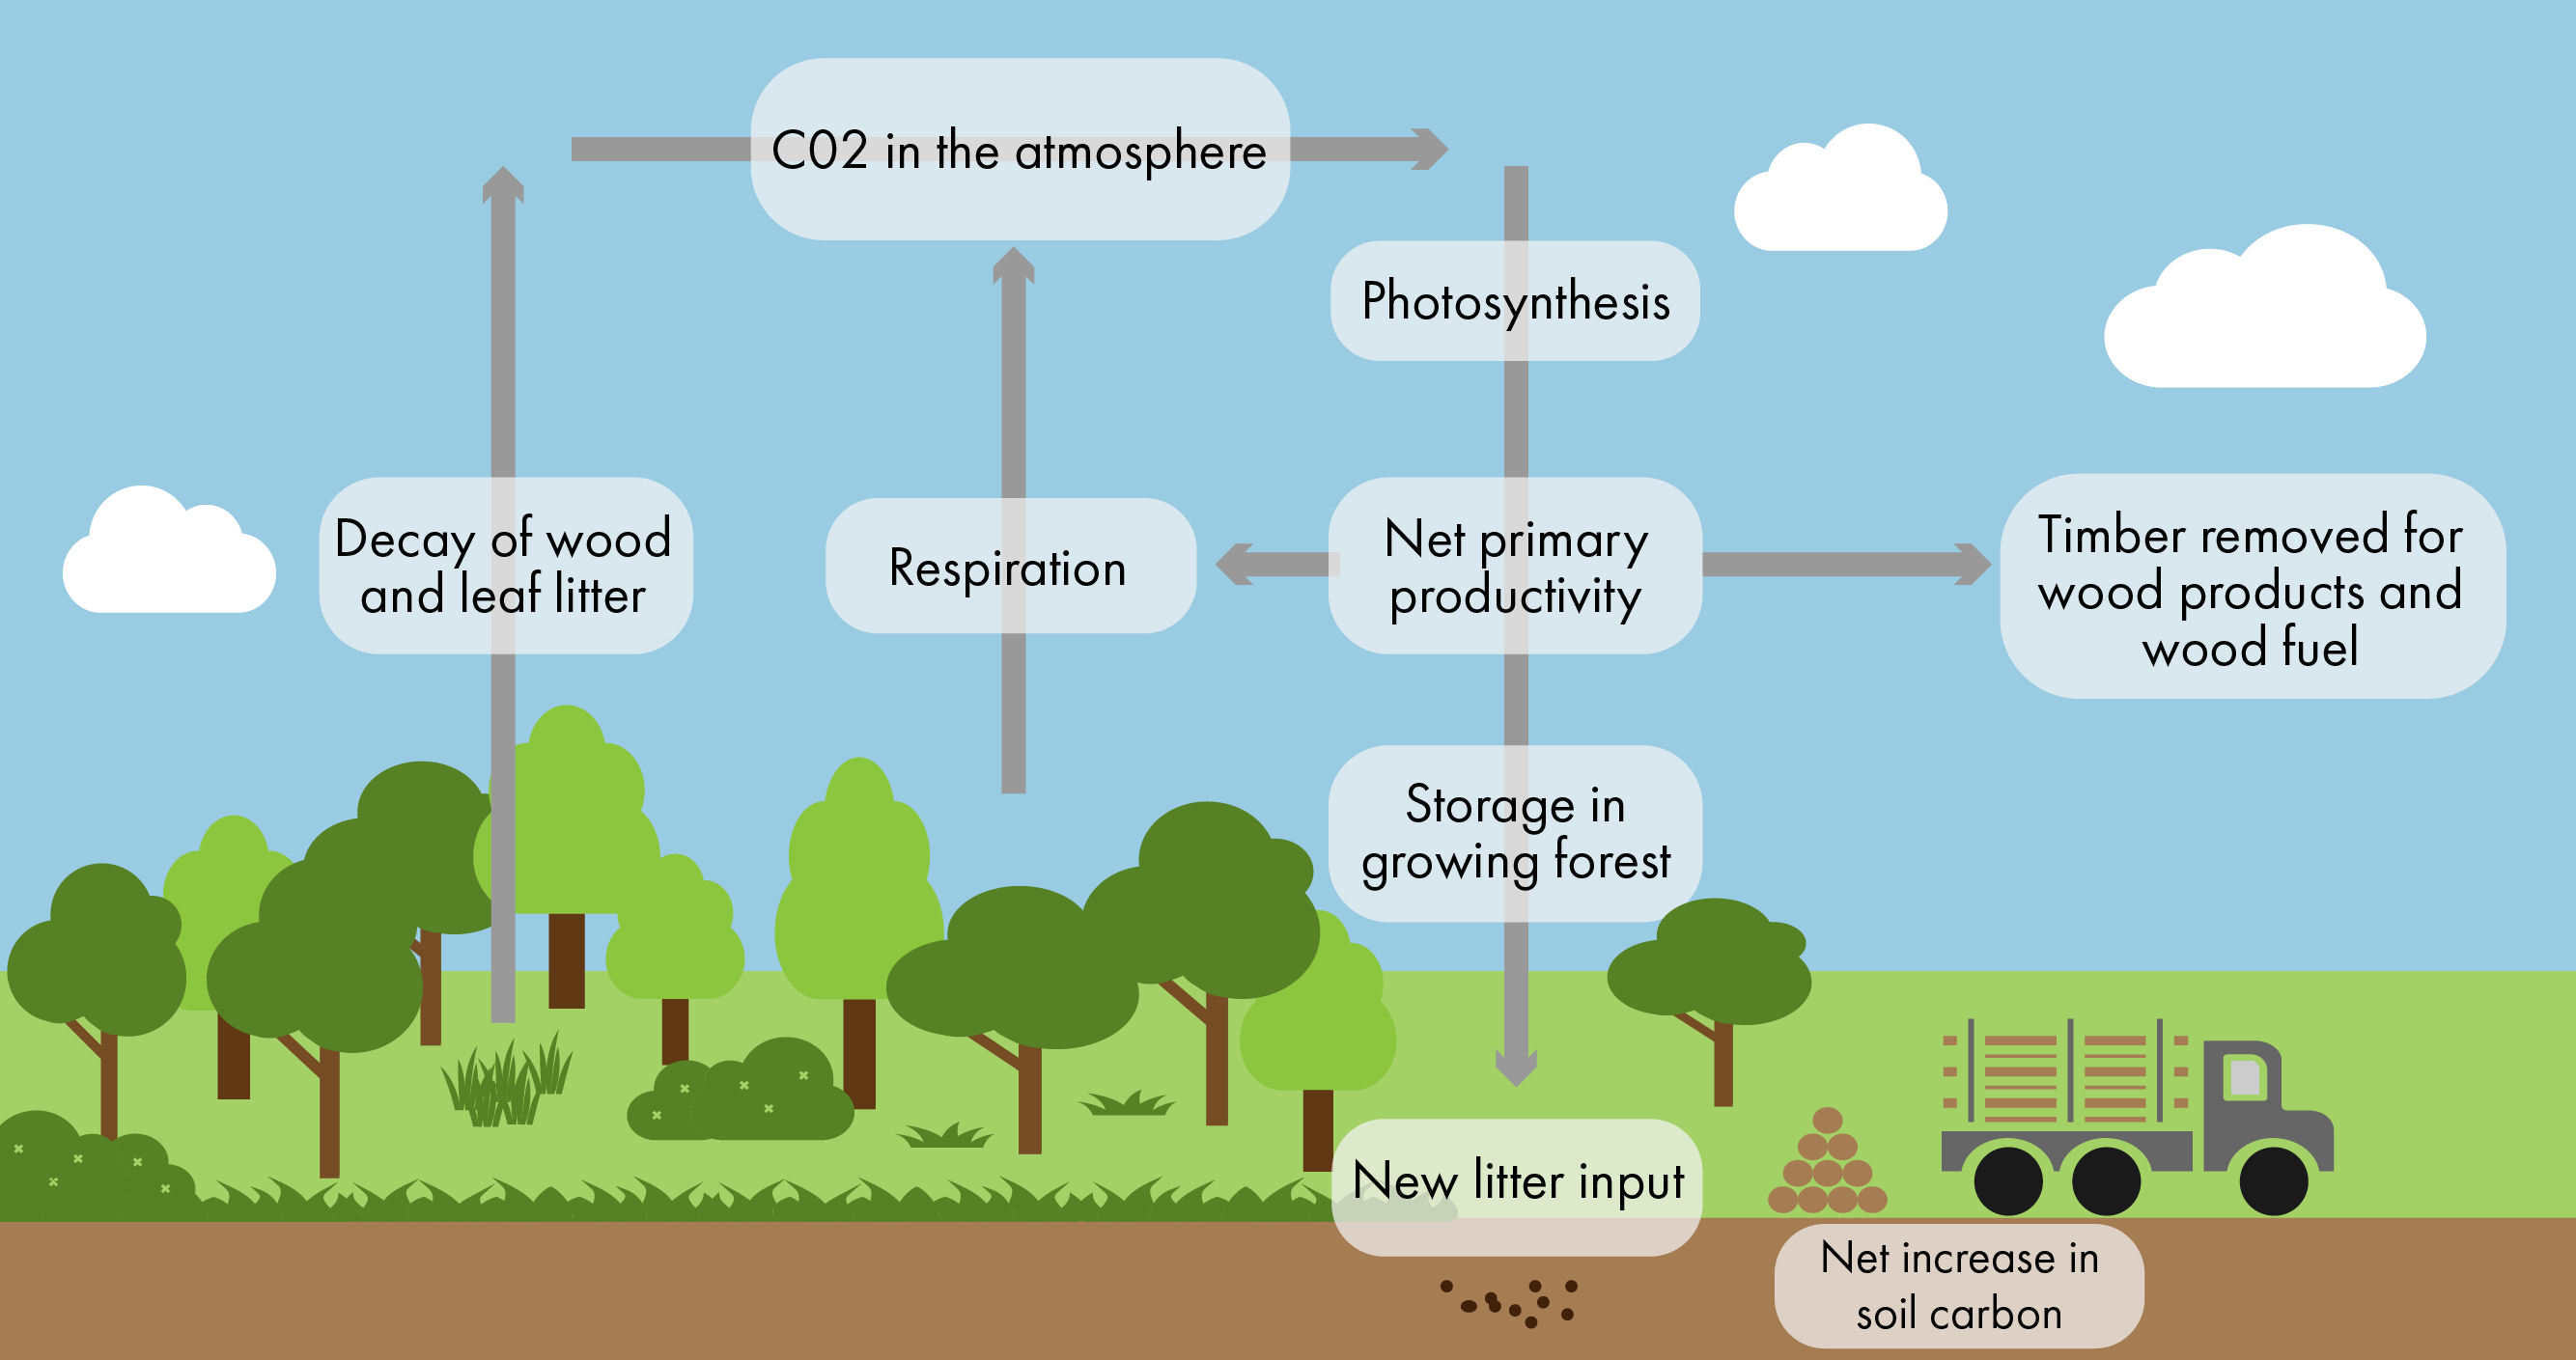 Trees can remove CO2 from the atmosphere and store it. The stored CO2 can later be released either through decaying biomass as litter (foliage, deadwood etc.) or absorbed in the soil